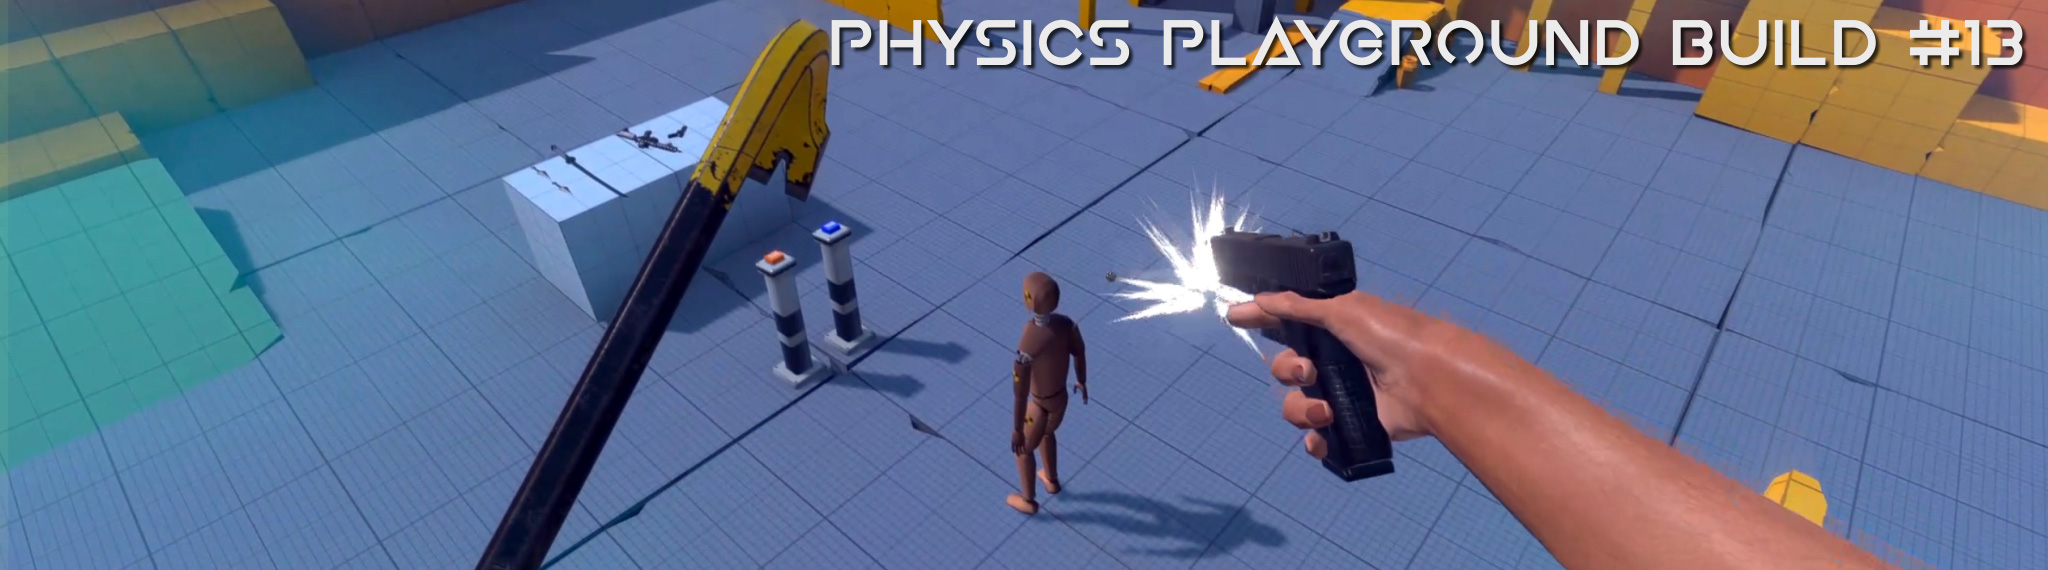 physicus download windows